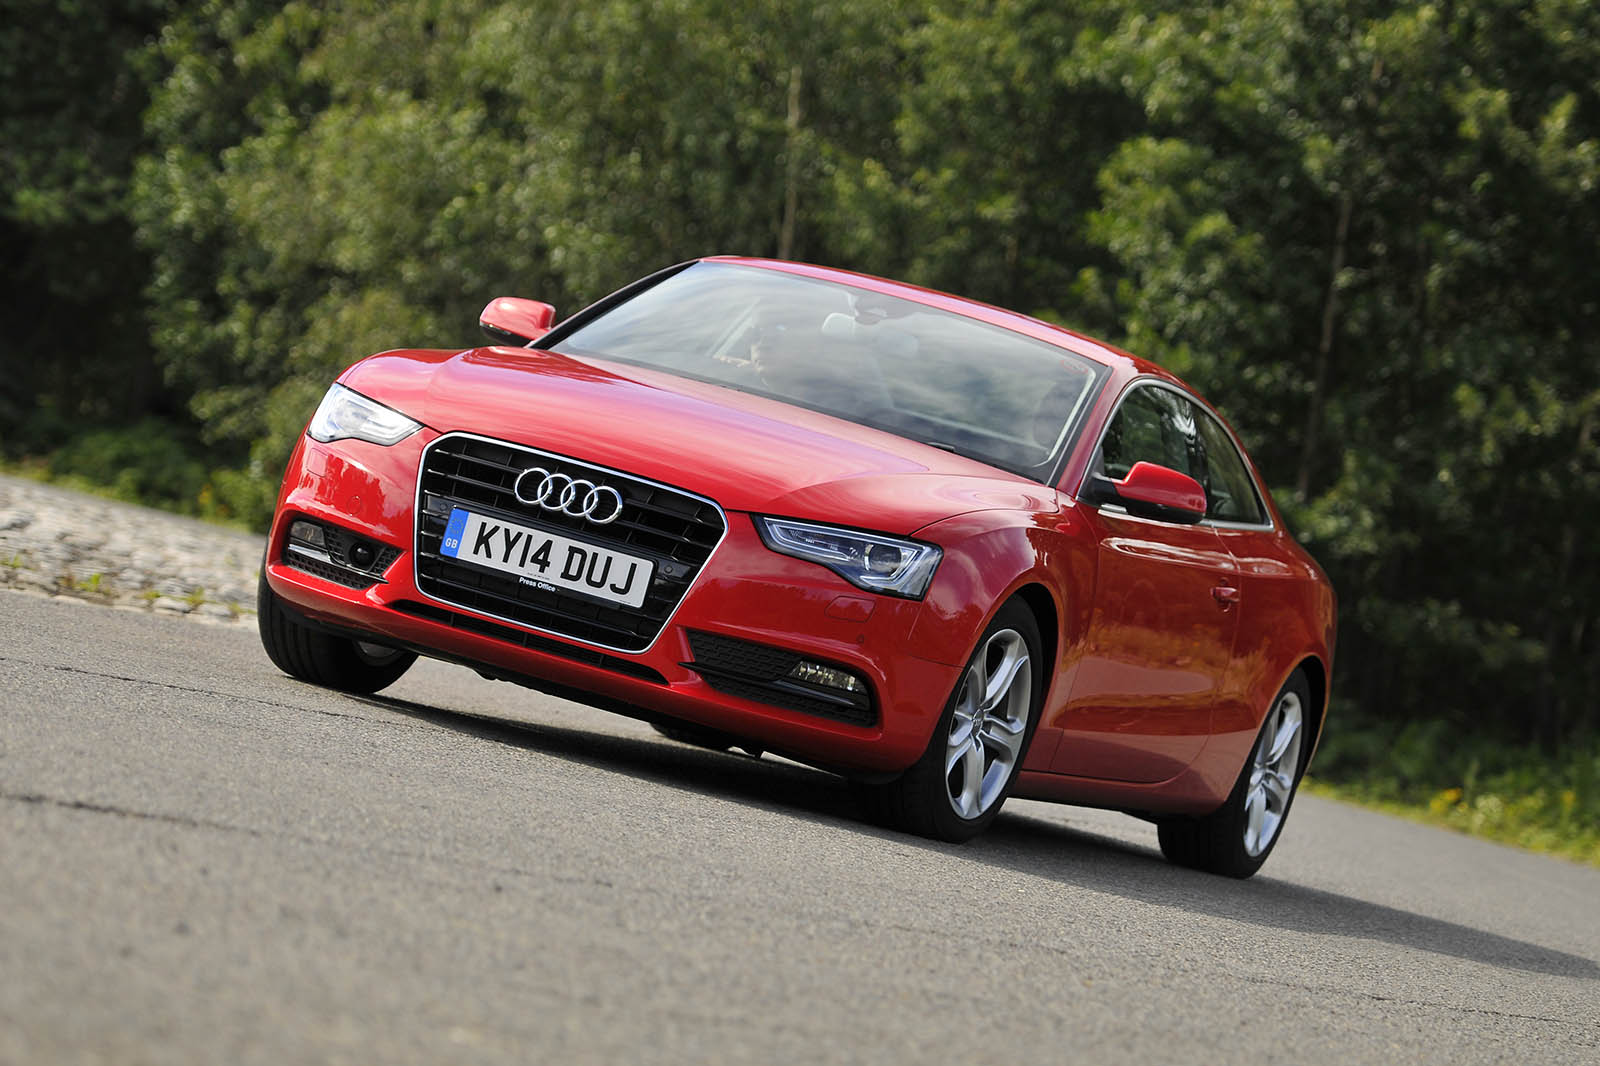 Audi A5 Review The Good & The Bad : 2013 audi A5 b8.5 